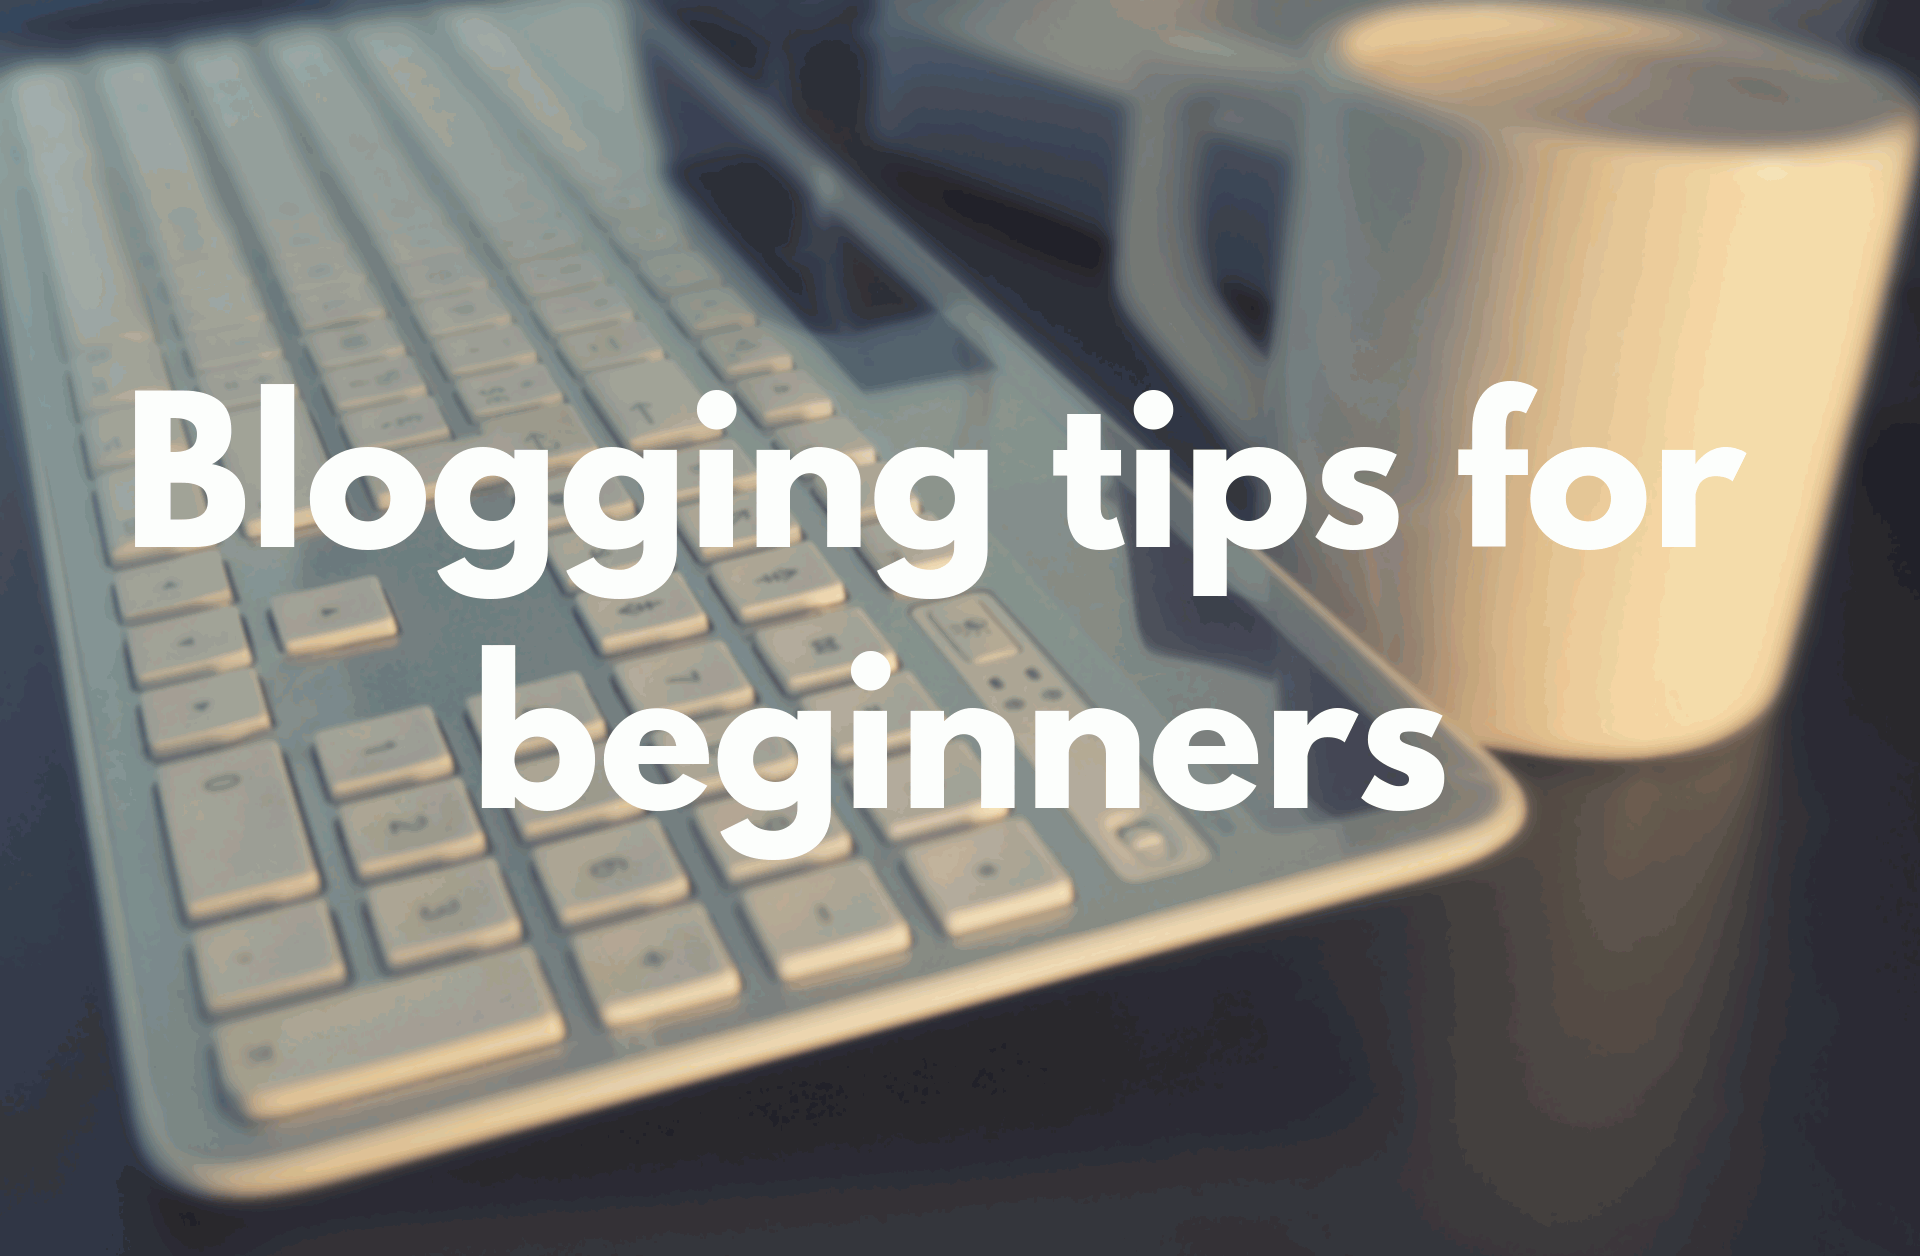 You are currently viewing Blogging tips for beginners